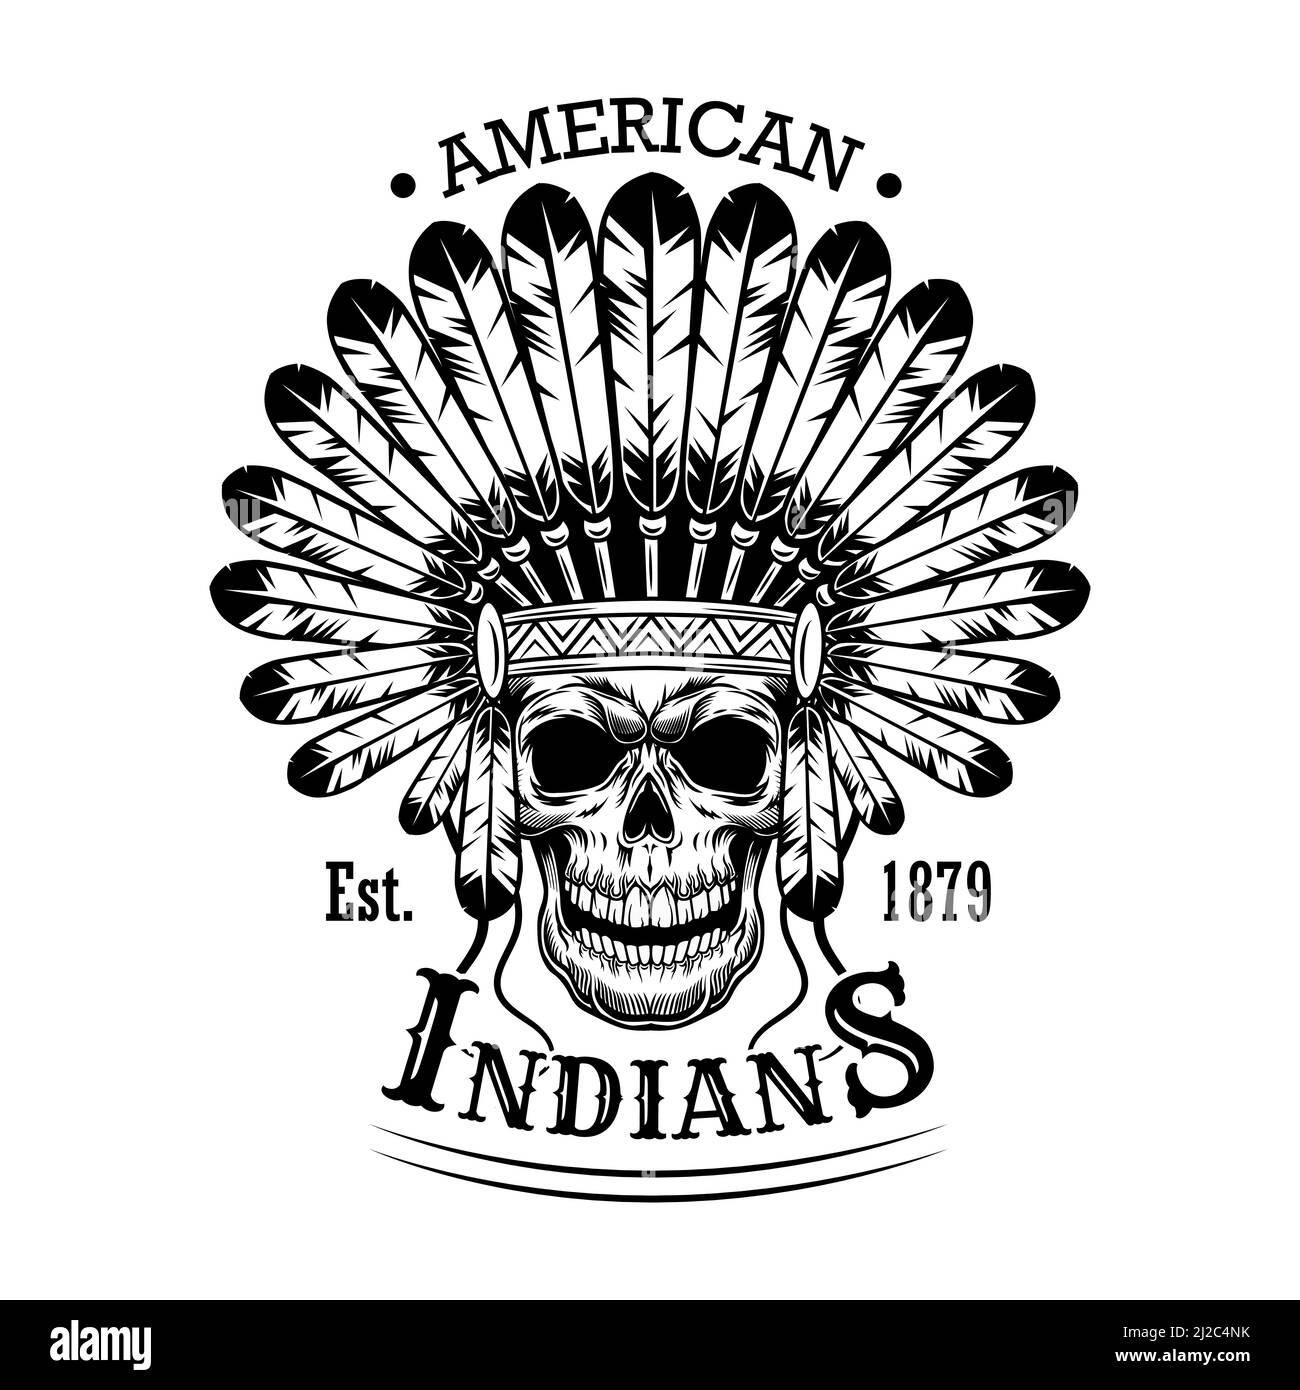 American Indian skull vector illustration. Head of skeleton with feather headdress and text. Native Americans and Red Indian concept for emblems or la Stock Vector